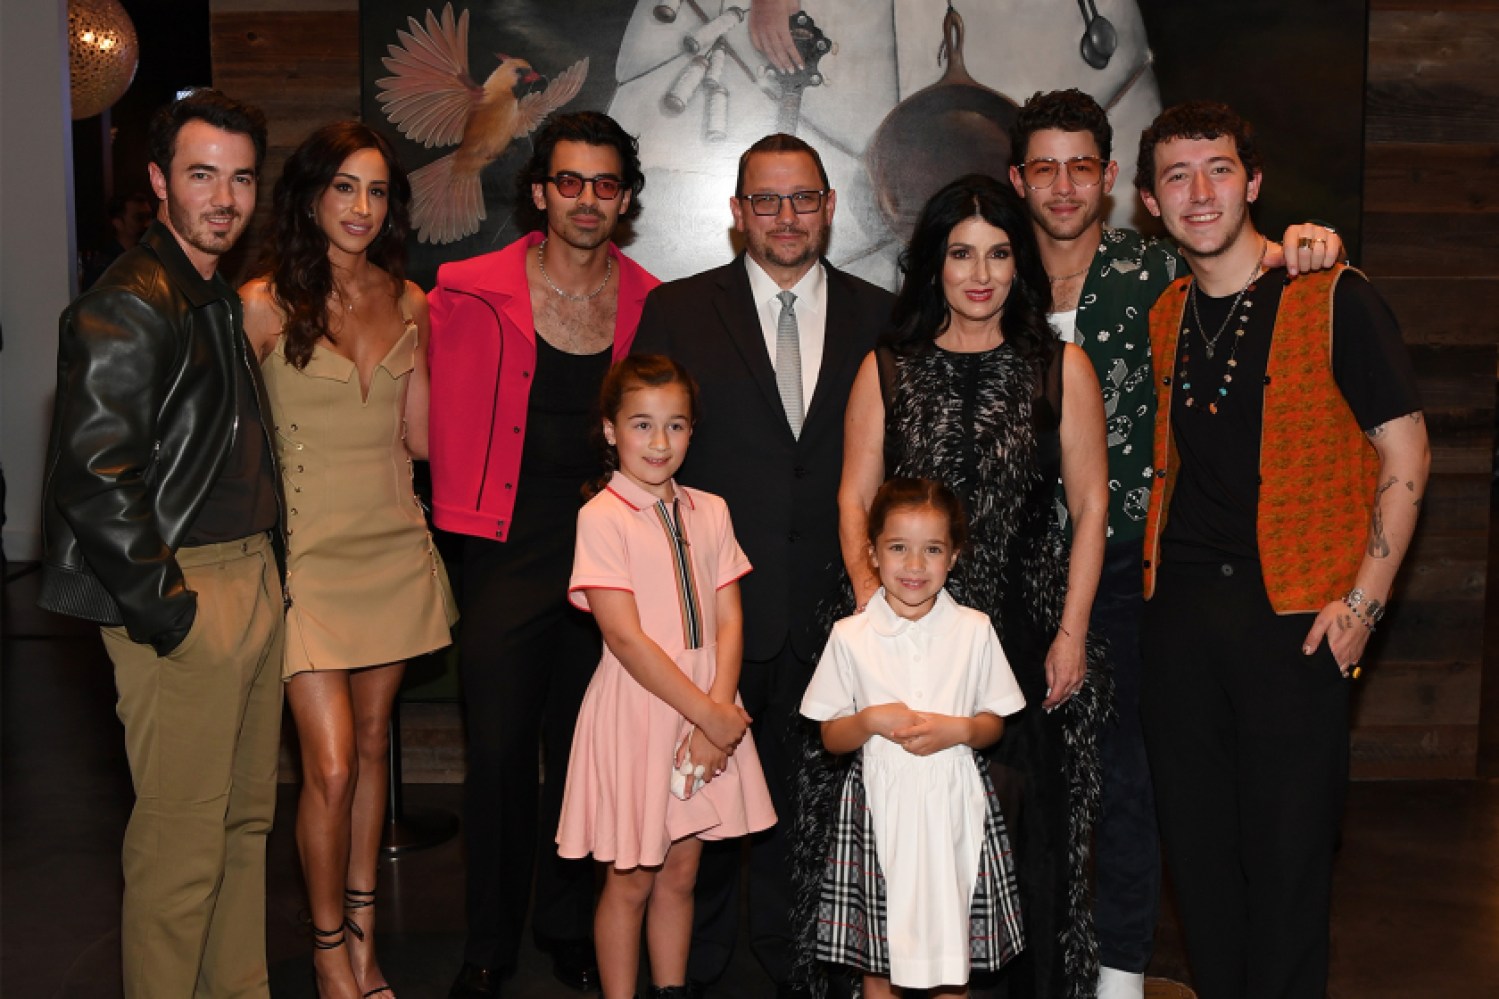 The Jonas Brothers and family in Las Vegas with Kevin Sr., the mastermind behind Nellie's Southern Kitchen, in the center.